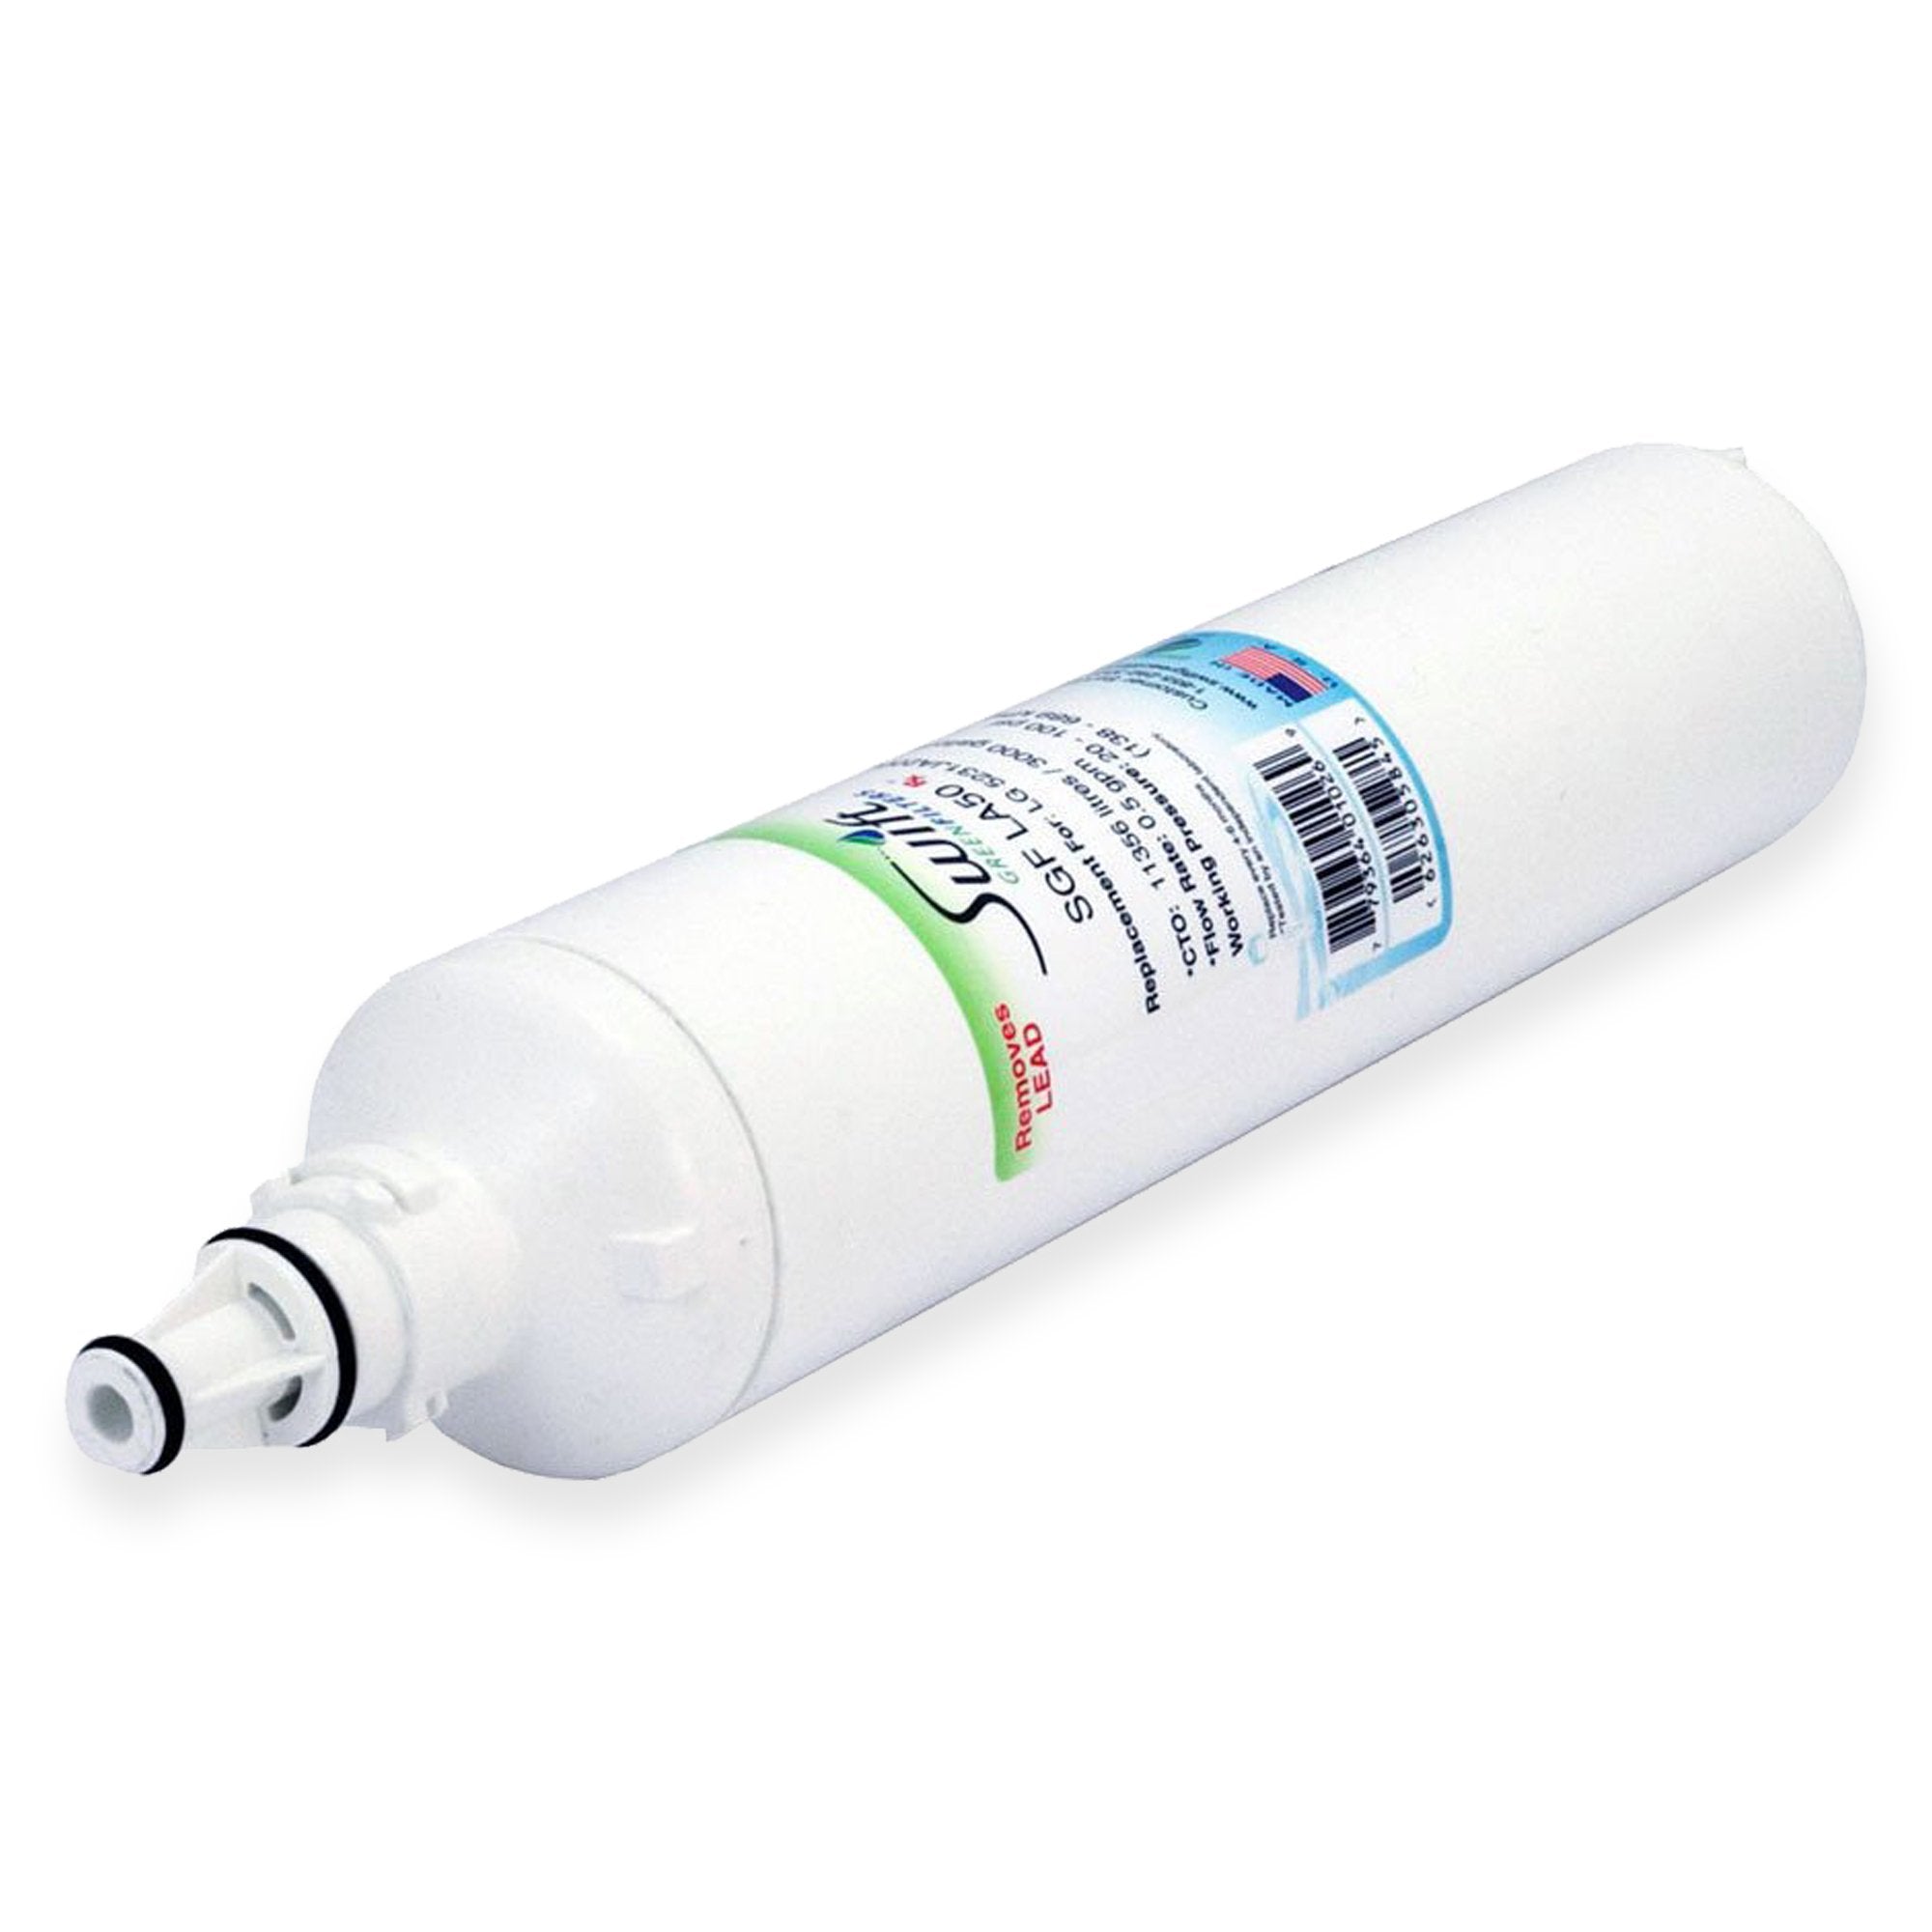 LG 5231JA2006A Compatible Pharmaceutical Refrigerator Water Filter